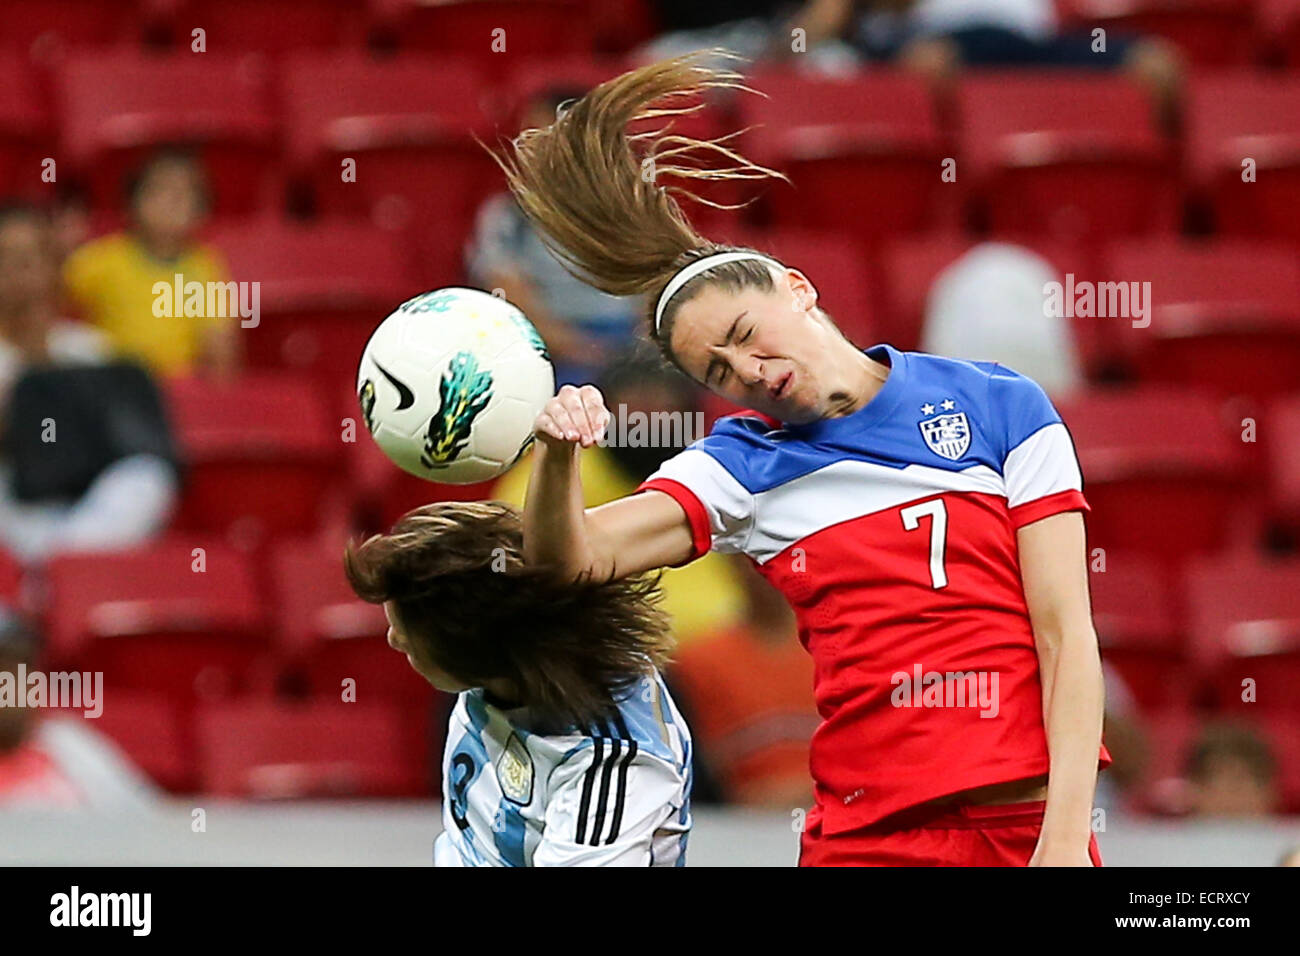 Brasilia, Brazil. 18th Dec, 2014. U.S. player Morgan Brian (R) heads for the ball with Argentina's Noelia Espindola during a match between the U.S. and Argentina of the 2014 International Tournament of Brasilia in Brasilia, capital of Brazil, Dec. 18, 2014. The U.S. won 7-0. © Xu Zijian/Xinhua/Alamy Live News Stock Photo